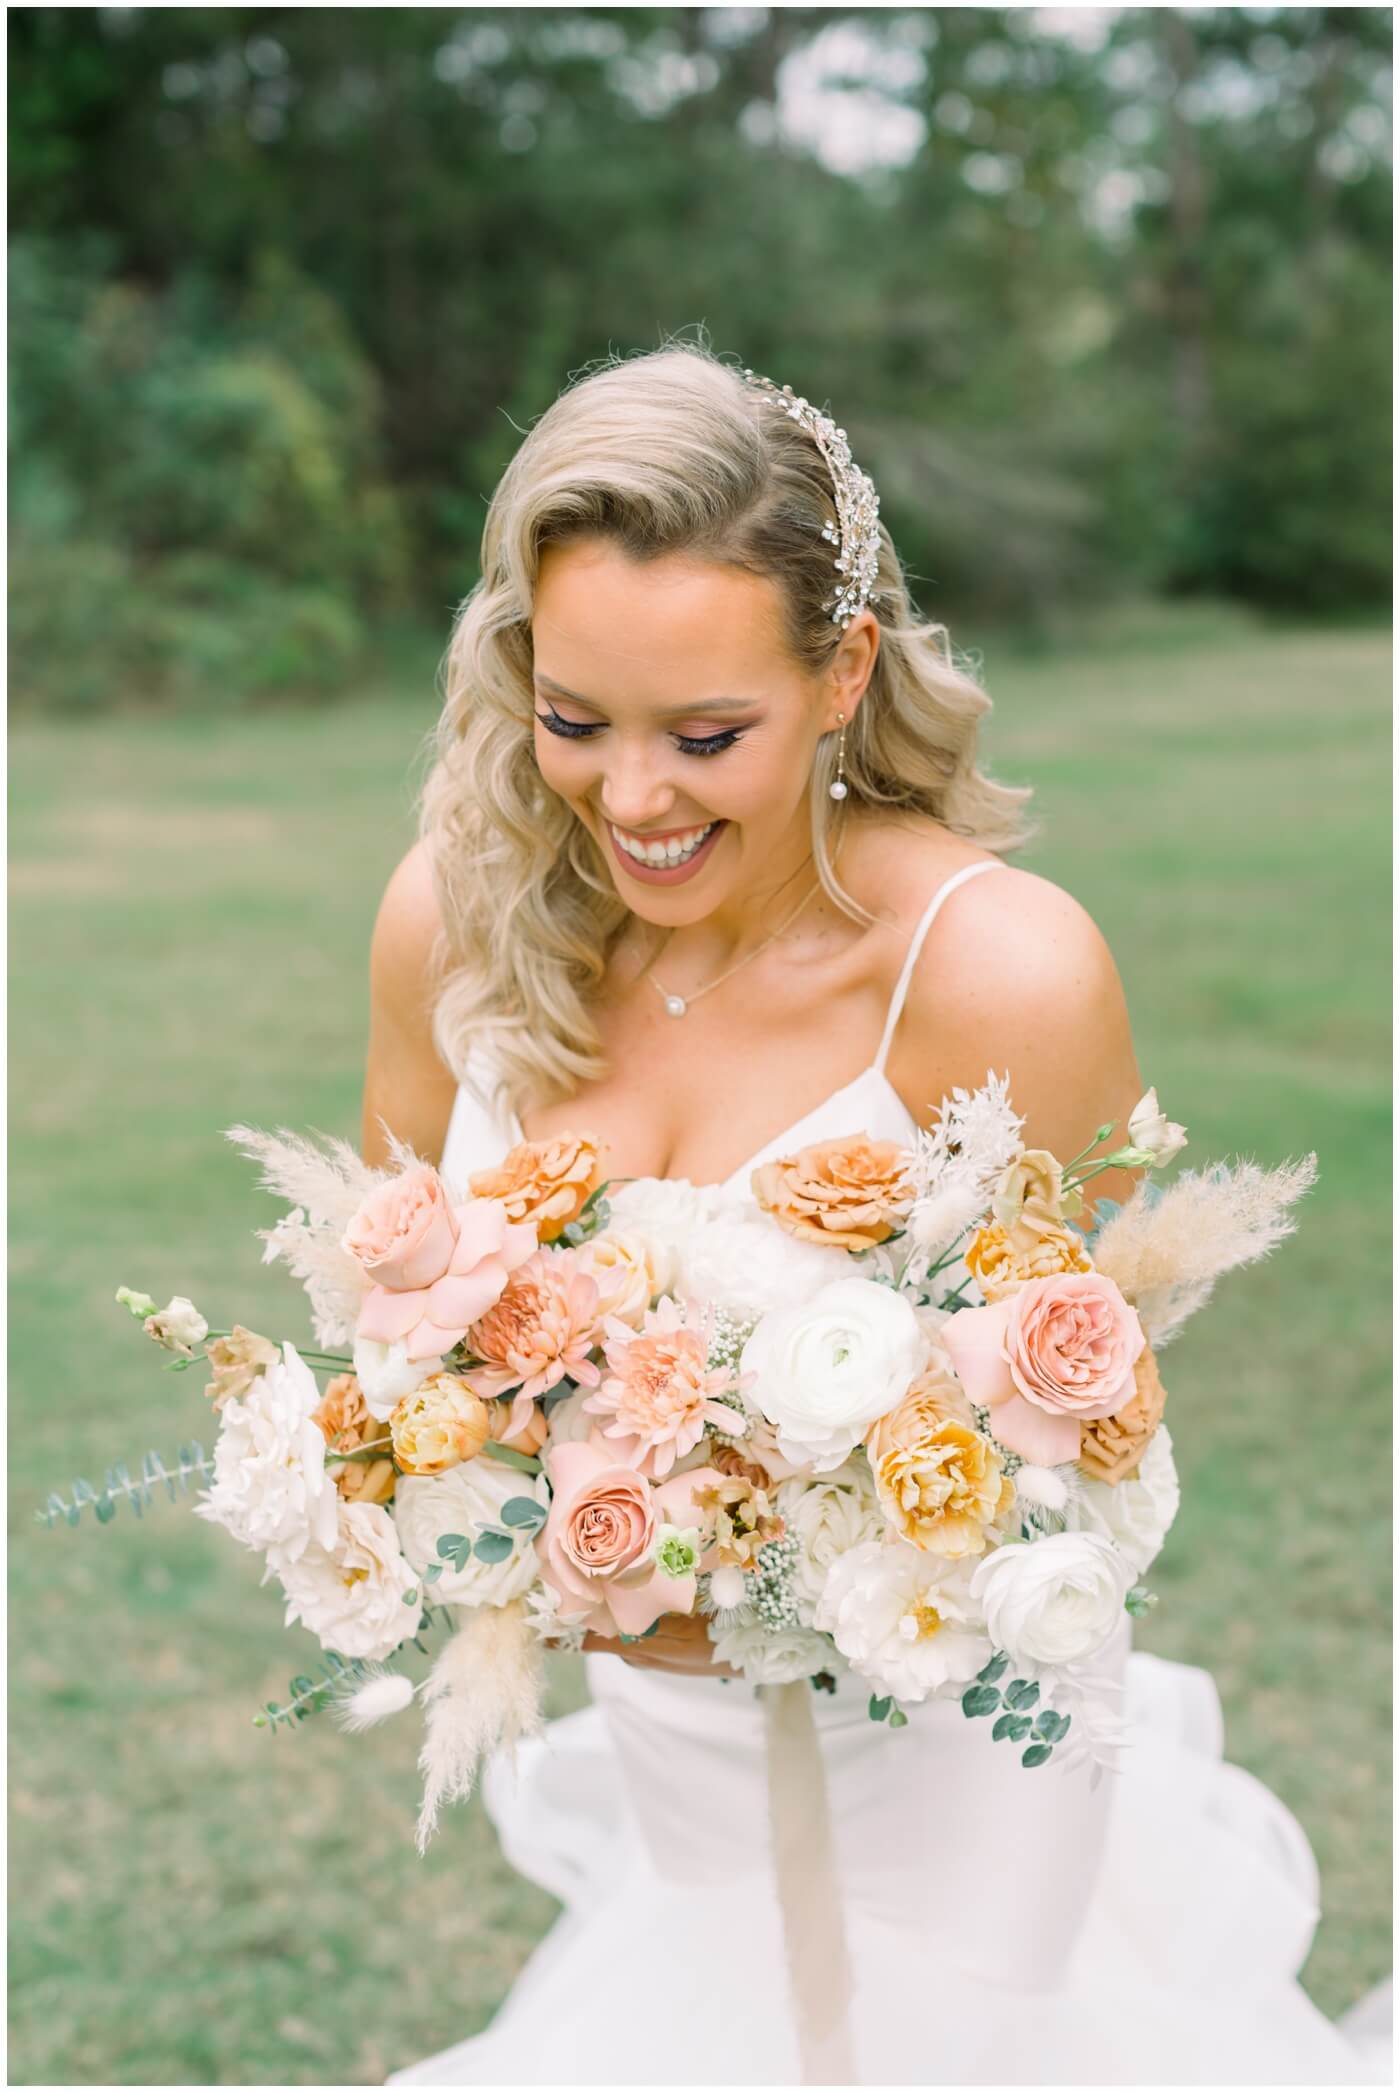 Houston Wedding at The Vine | the bride laughing with her bouquet 